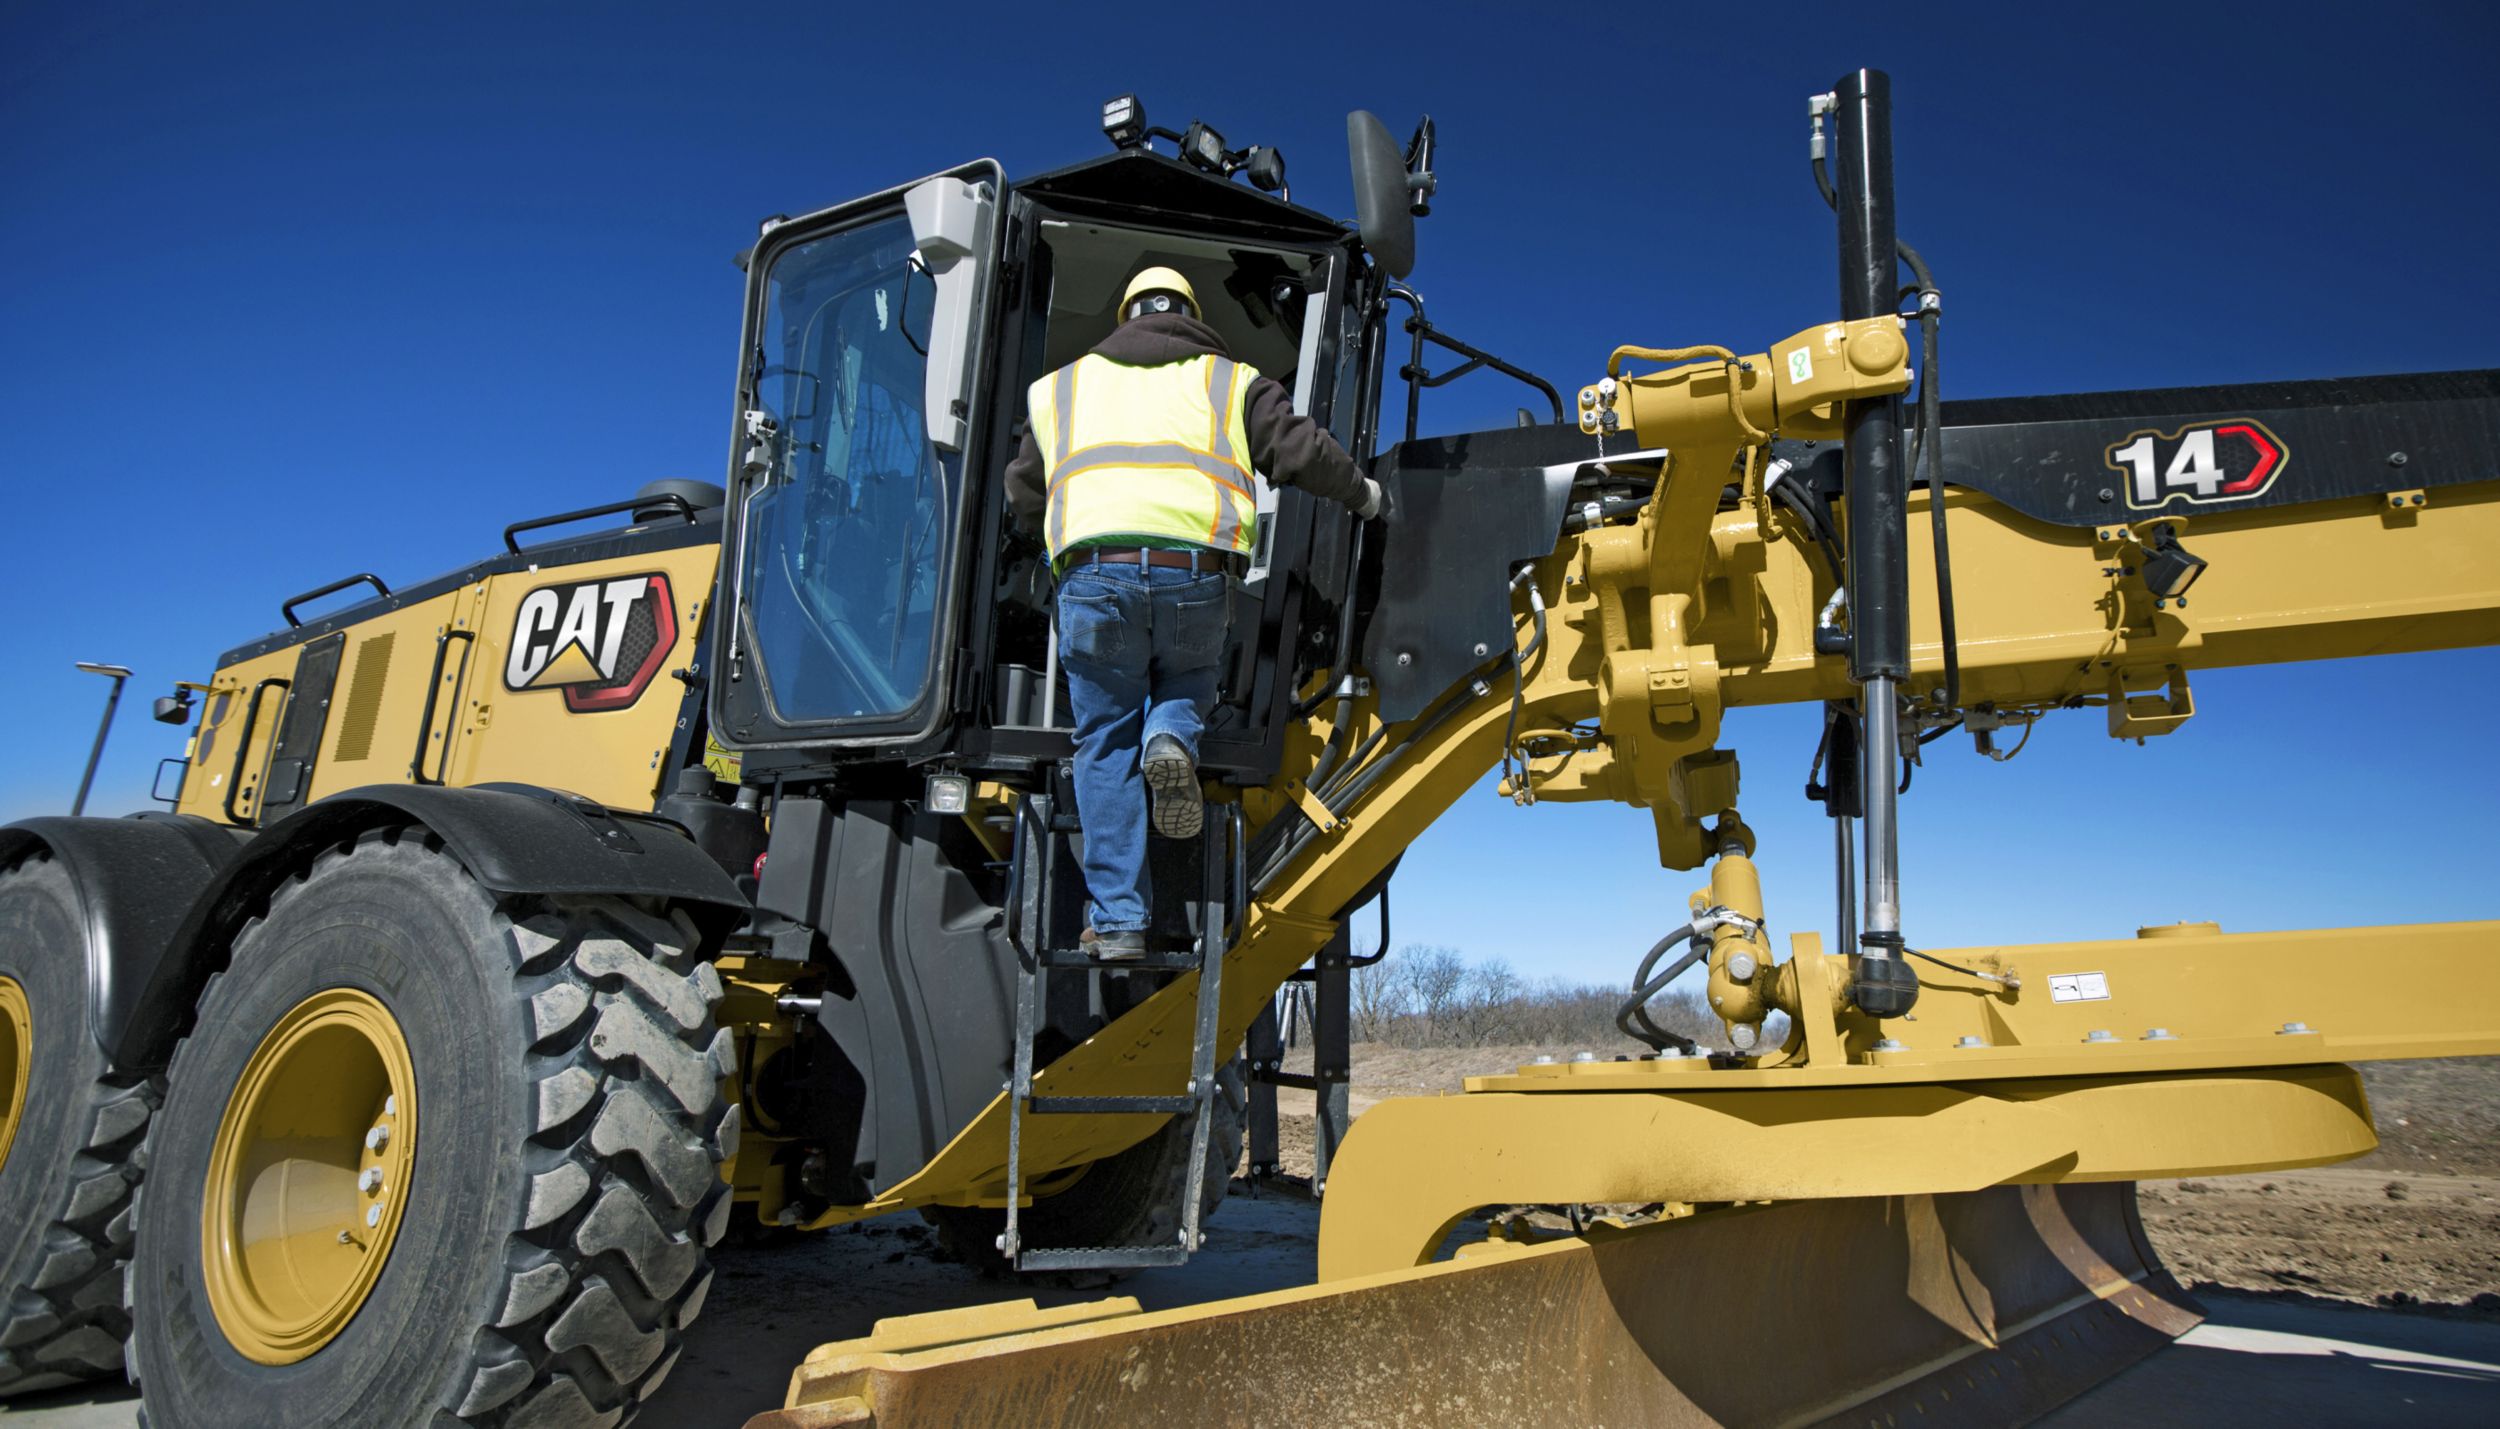 Cat 14 Motor Grader - BUILT-IN SAFETY FEATURES